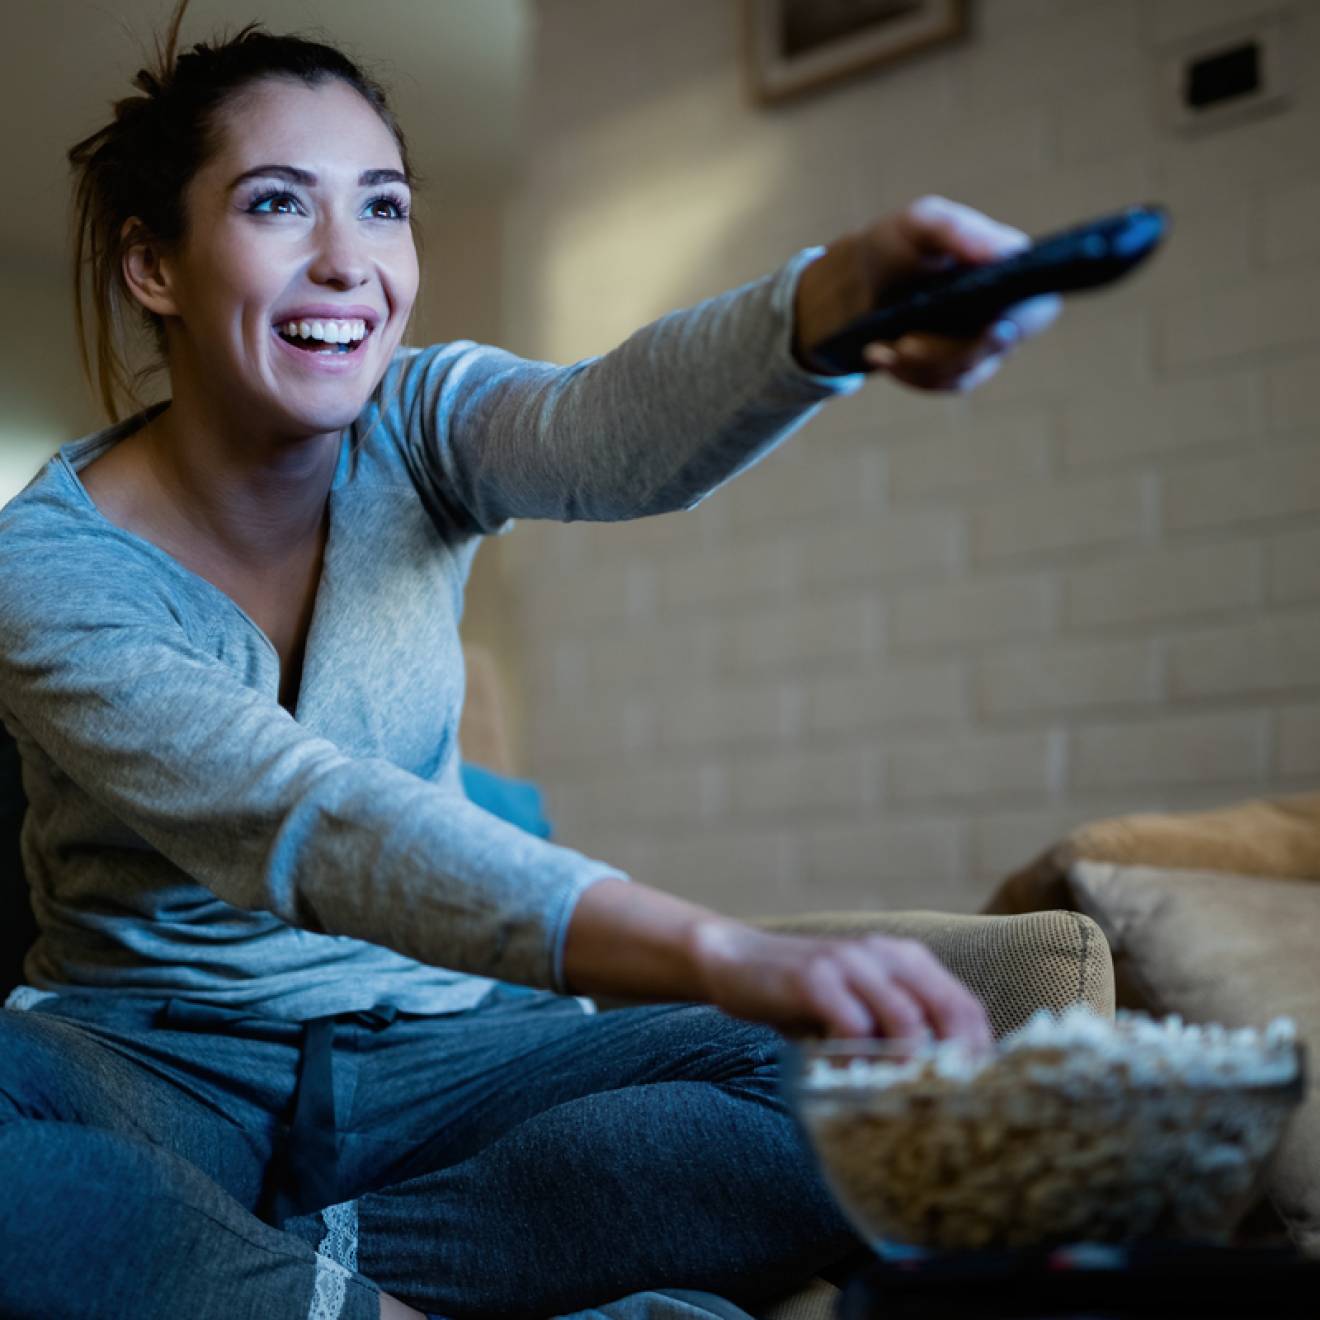 A young woman smiling holding a remote and eating popcorn